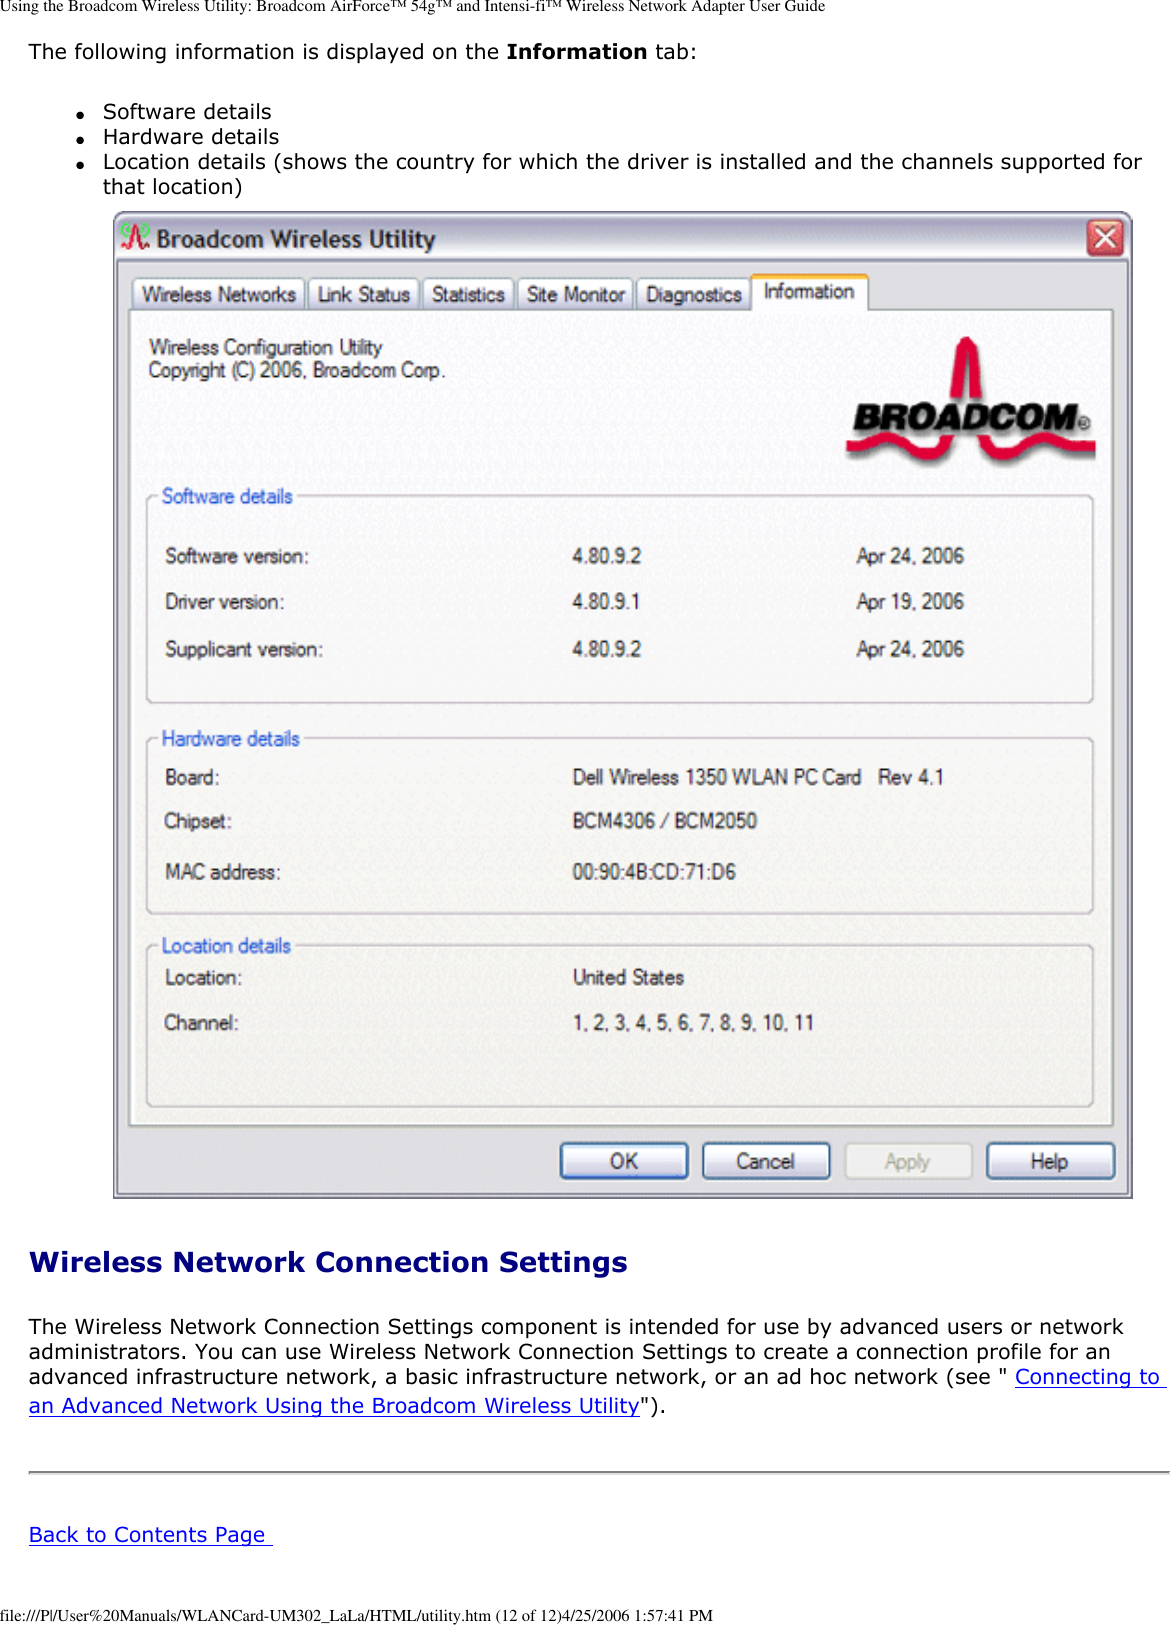 Using the Broadcom Wireless Utility: Broadcom AirForce™ 54g™ and Intensi-fi™ Wireless Network Adapter User GuideThe following information is displayed on the Information tab: ●     Software details ●     Hardware details ●     Location details (shows the country for which the driver is installed and the channels supported for that location)  Wireless Network Connection Settings The Wireless Network Connection Settings component is intended for use by advanced users or network administrators. You can use Wireless Network Connection Settings to create a connection profile for an advanced infrastructure network, a basic infrastructure network, or an ad hoc network (see &quot; Connecting to an Advanced Network Using the Broadcom Wireless Utility&quot;). Back to Contents Page file:///P|/User%20Manuals/WLANCard-UM302_LaLa/HTML/utility.htm (12 of 12)4/25/2006 1:57:41 PM